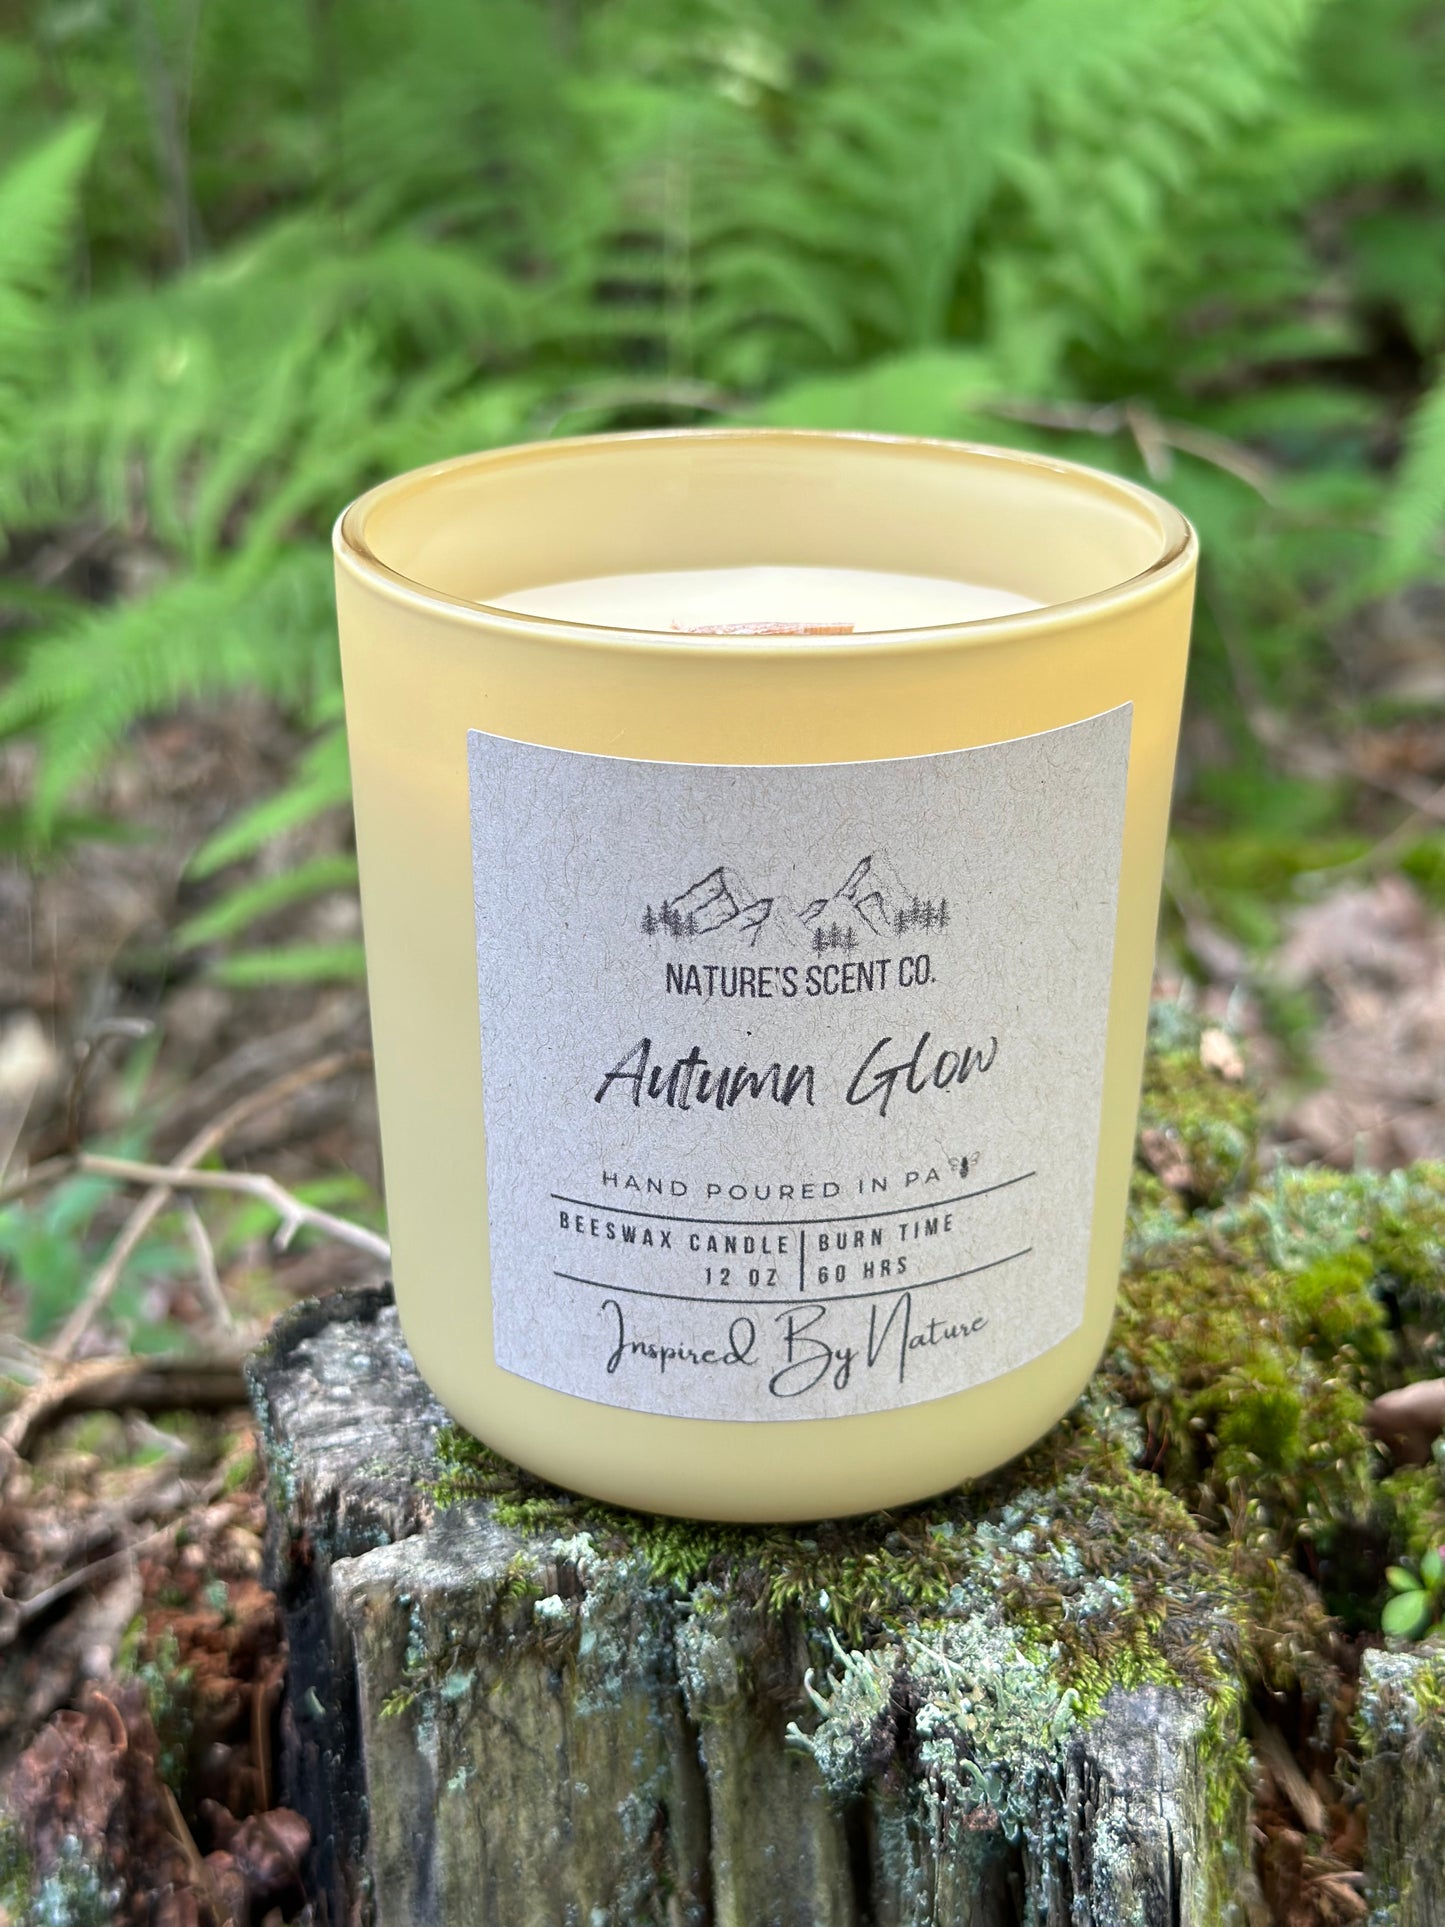 Autumn Glow Beeswax Candle